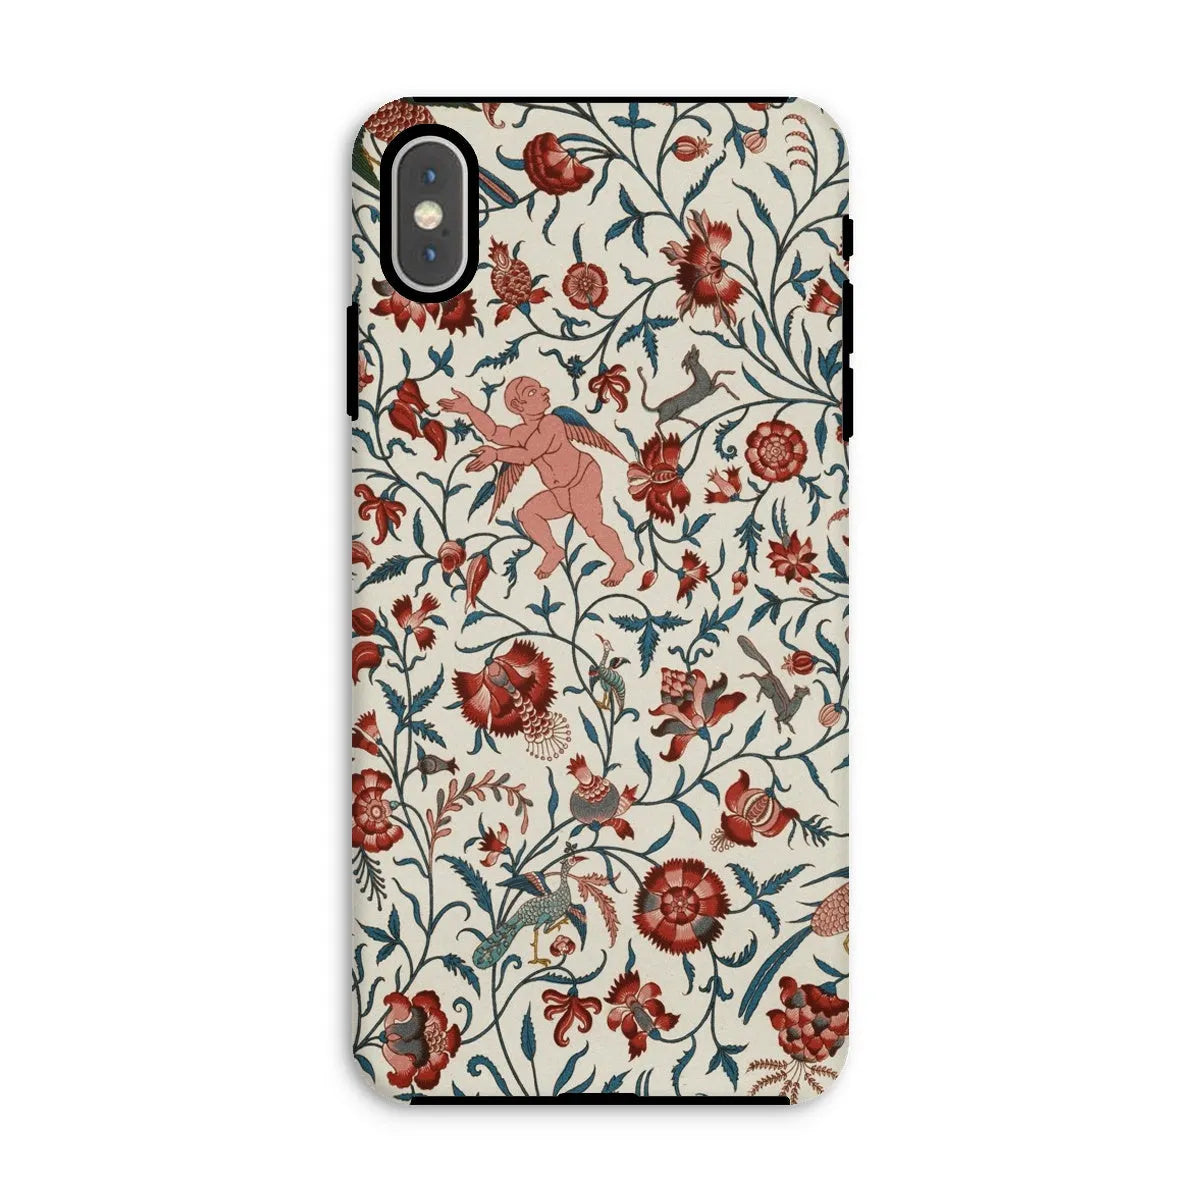 Persian Pattern From L’ornement Polychrome By Auguste Racinet Tough Phone Case - Iphone Xs Max / Matte - Mobile Phone